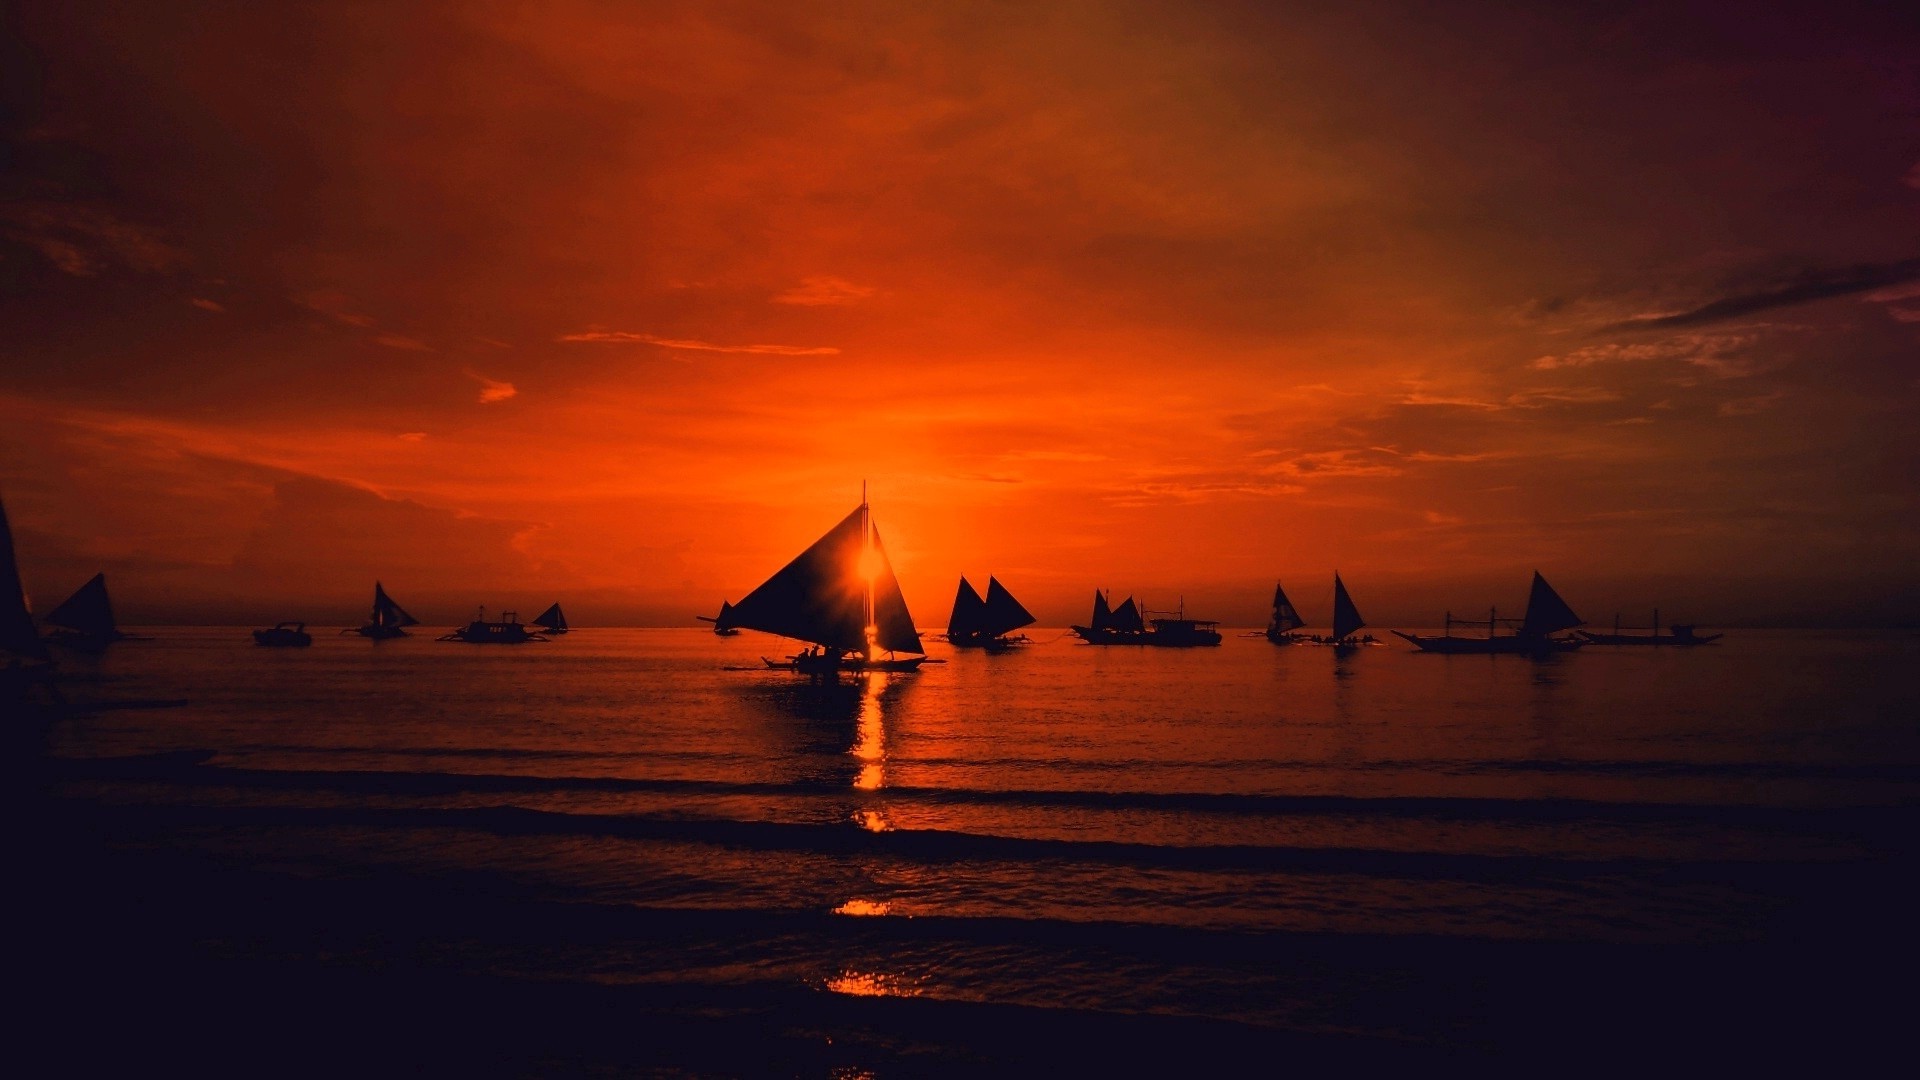 red Sky, Sailboats, Sunset, Sea, Clouds, Nature, Landscape Wallpaper